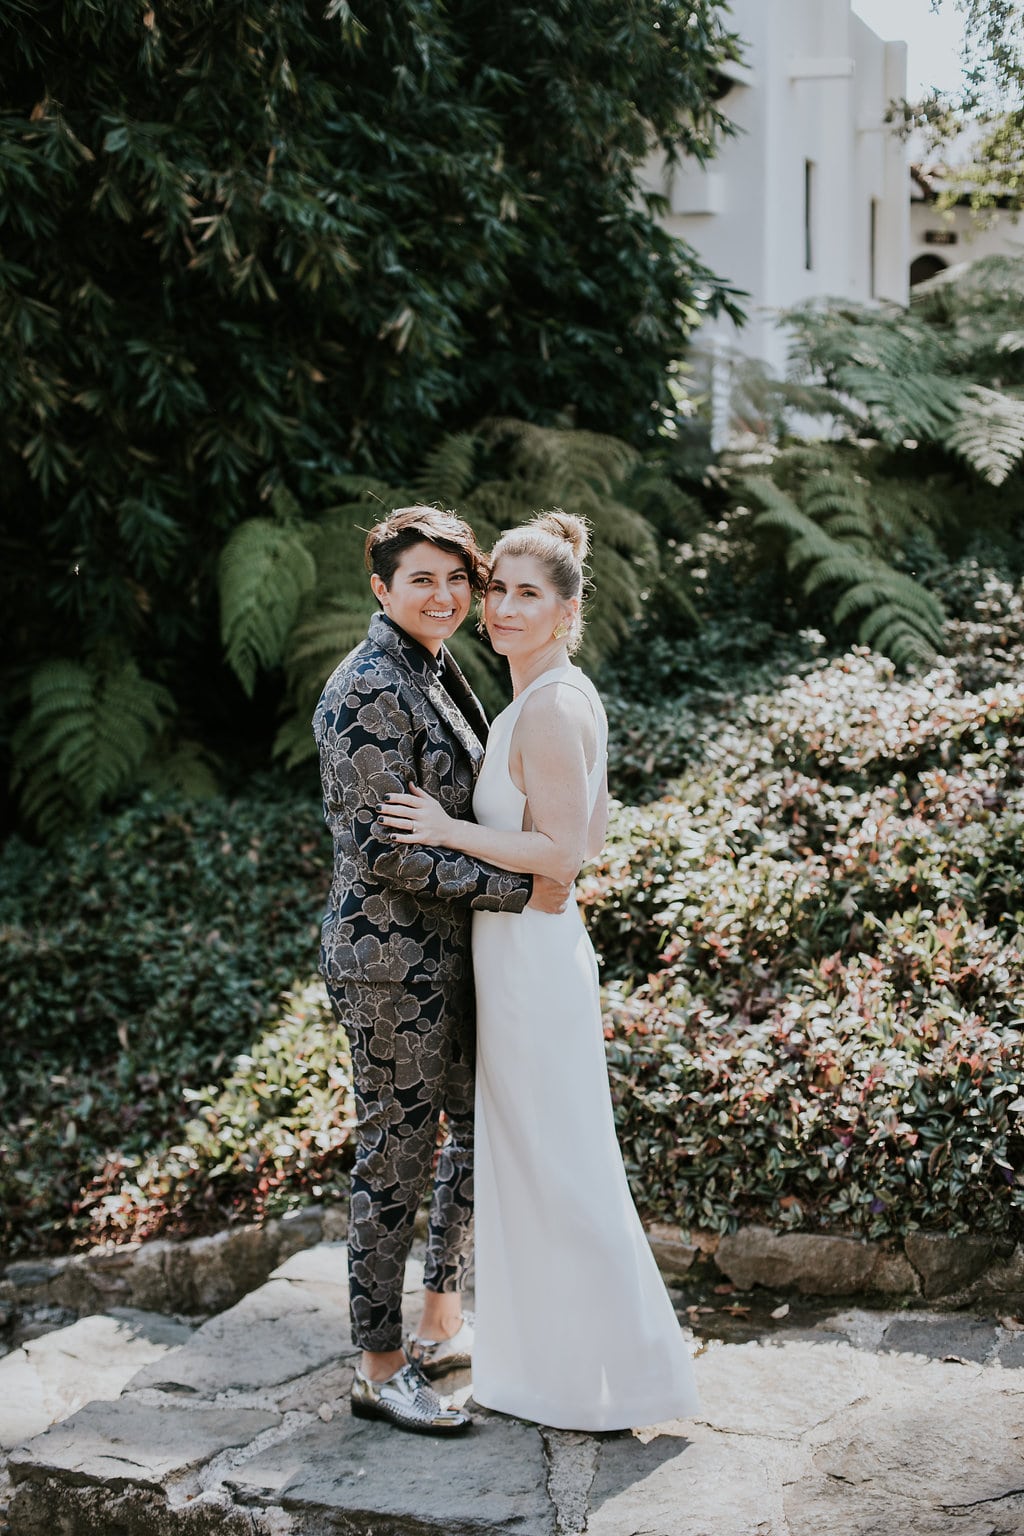 A queer couple in a wedding dress and brocade grey and black suit smile in an embrace in front of botanicals in a Studio XIII Photography image